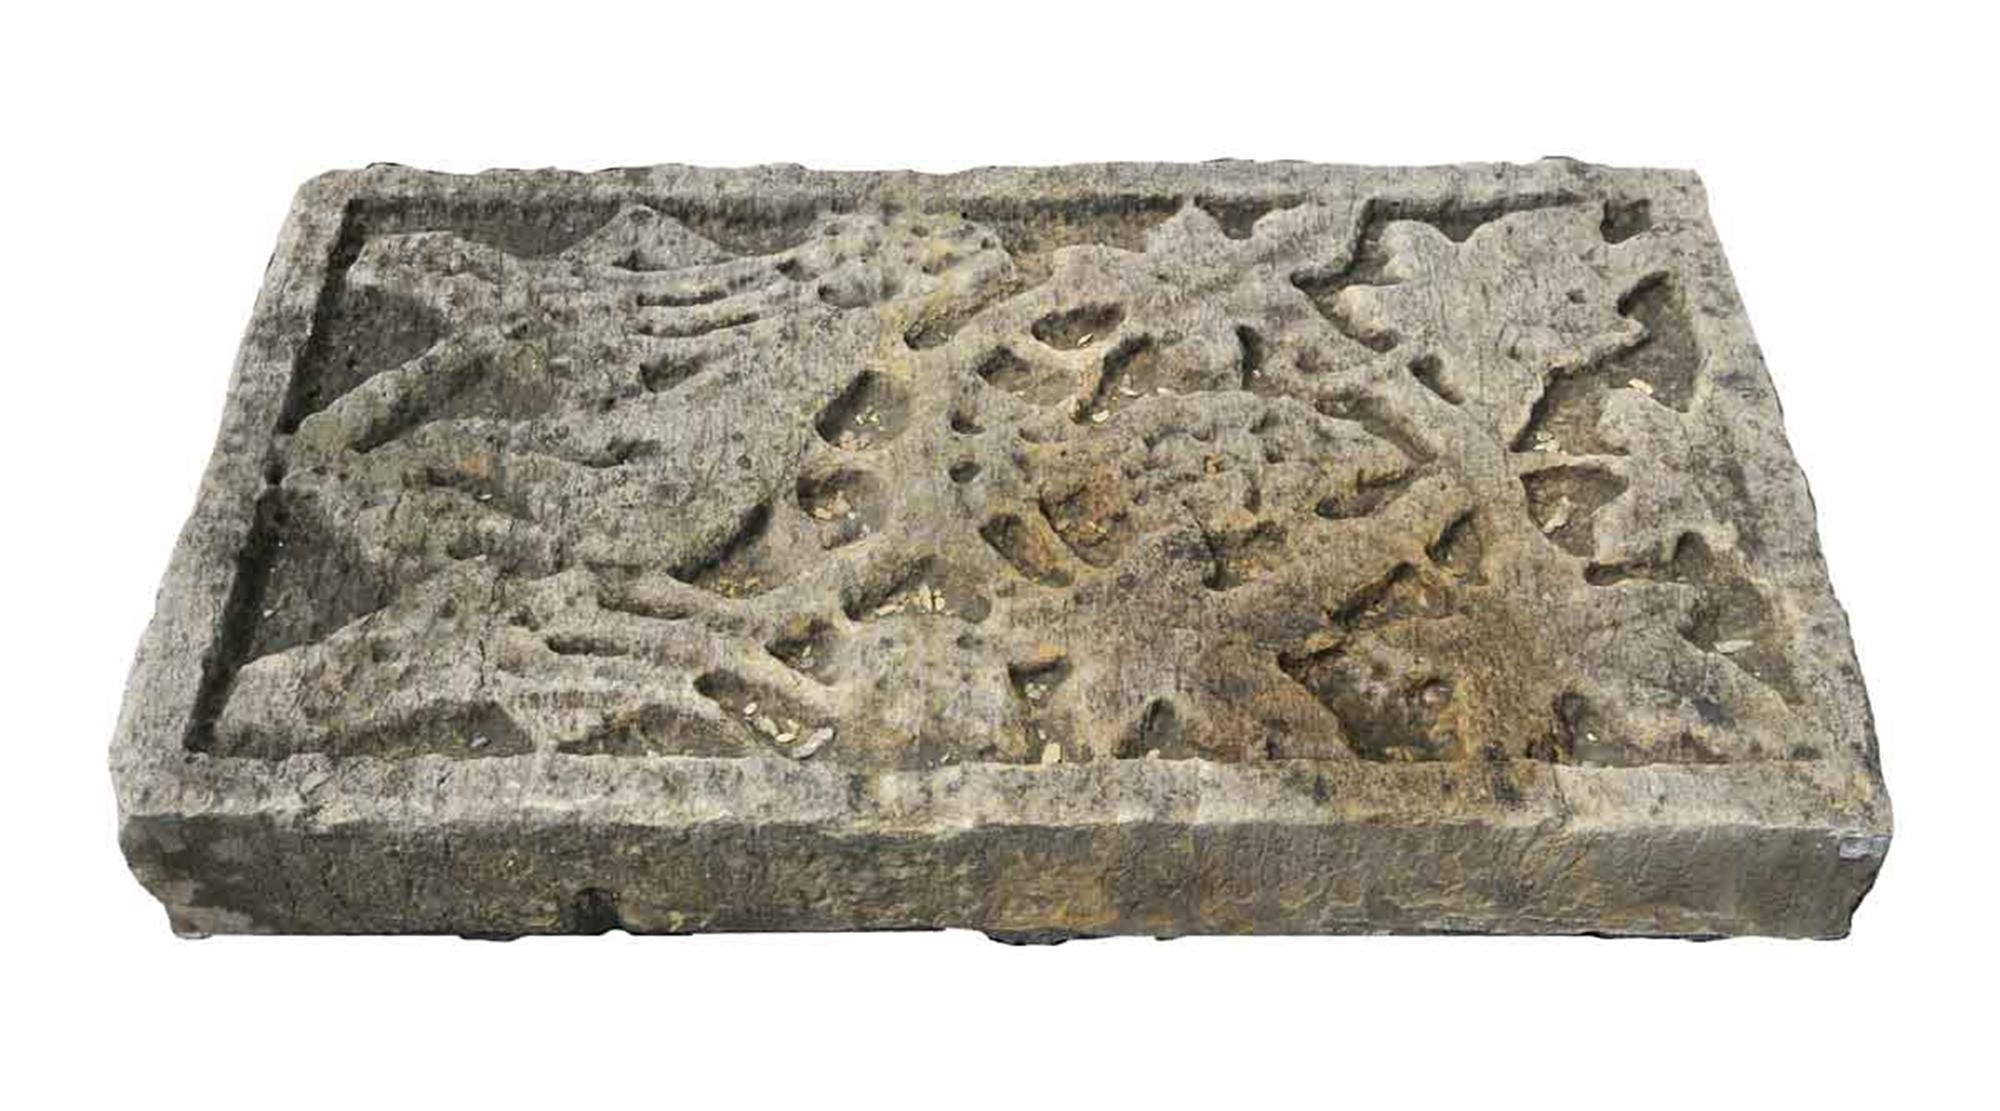 1920s, limestone frieze with detailed hand carved leaves and fruit. This was originally form the exterior of a Manhattan building. This can be seen at our 400 Gilligan St location in Scranton, PA.